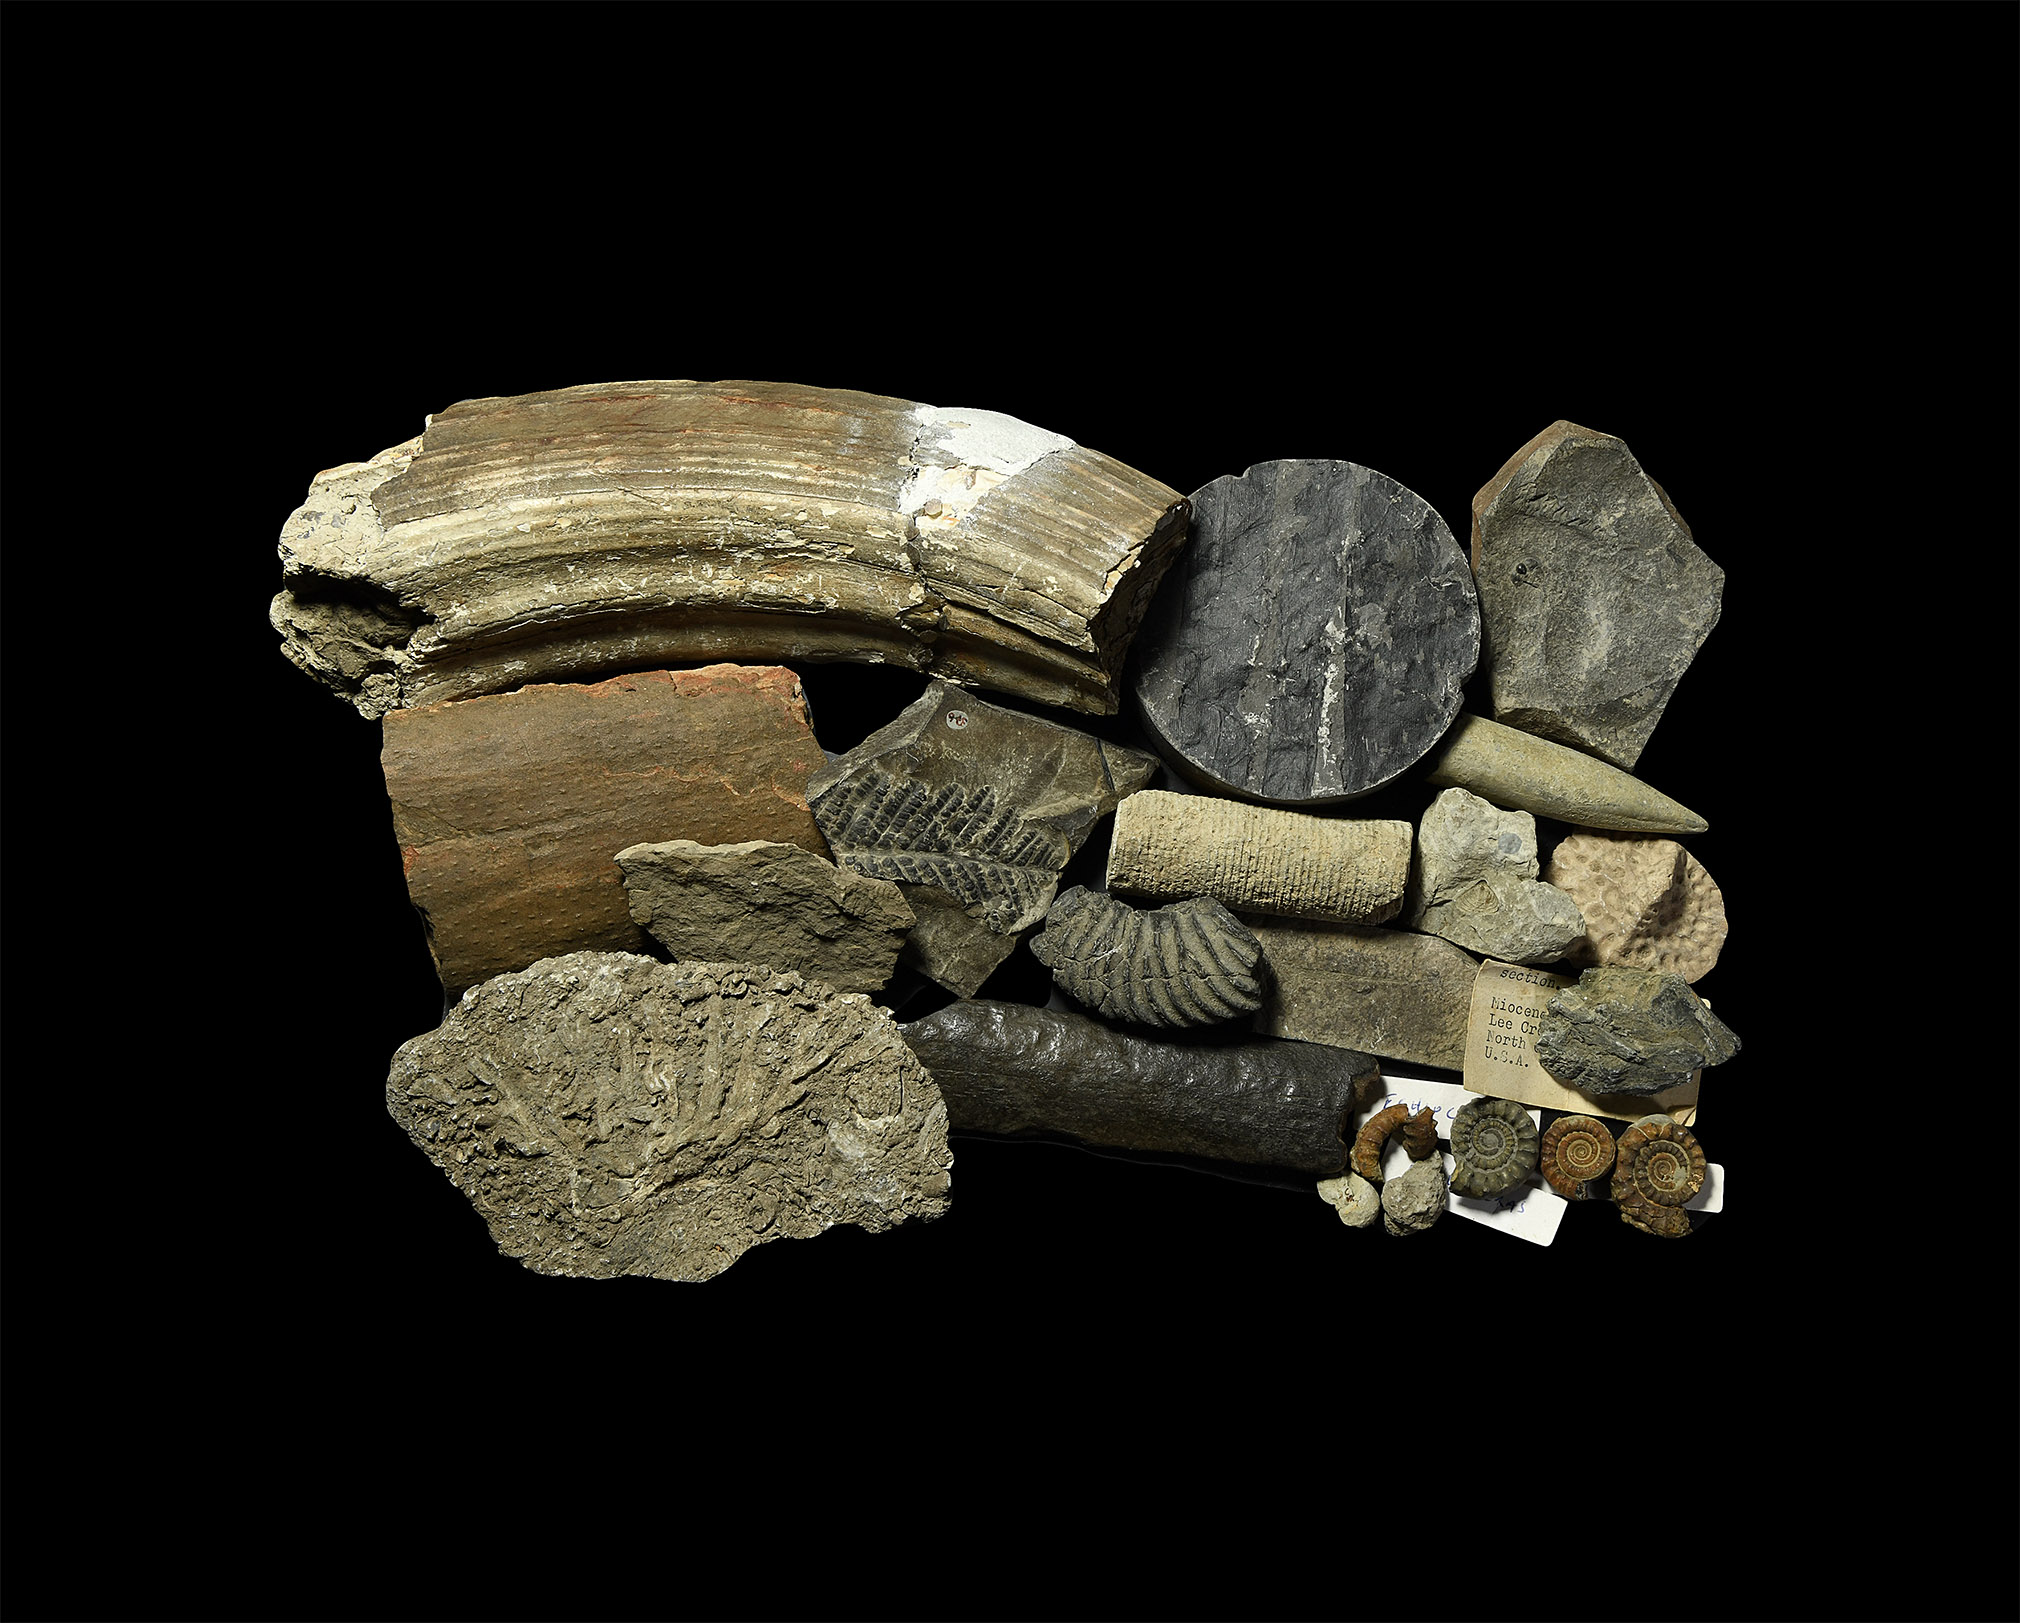 Fossil Collection